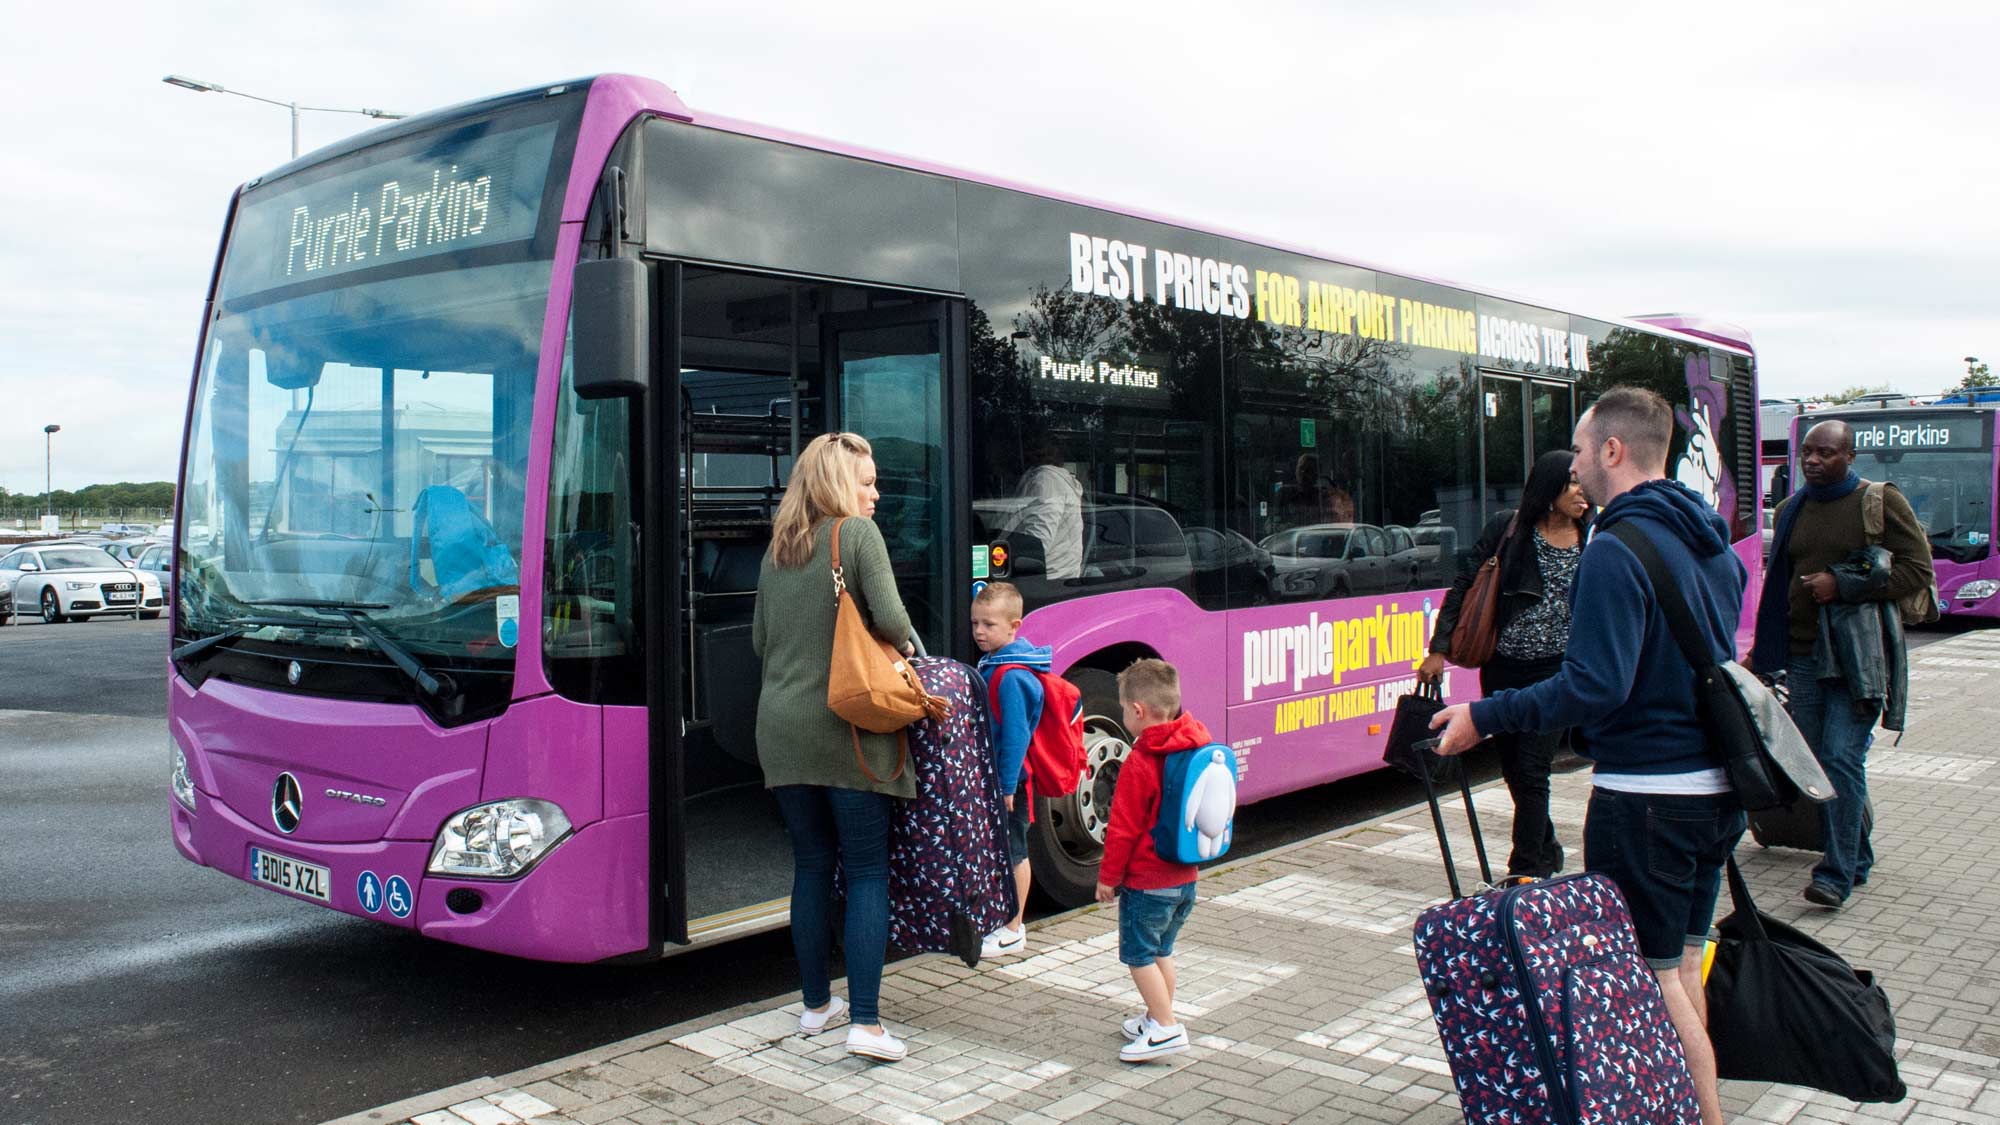 Purple Parking Park and Ride Gatwick   Gatwick Airport Parking   I ...